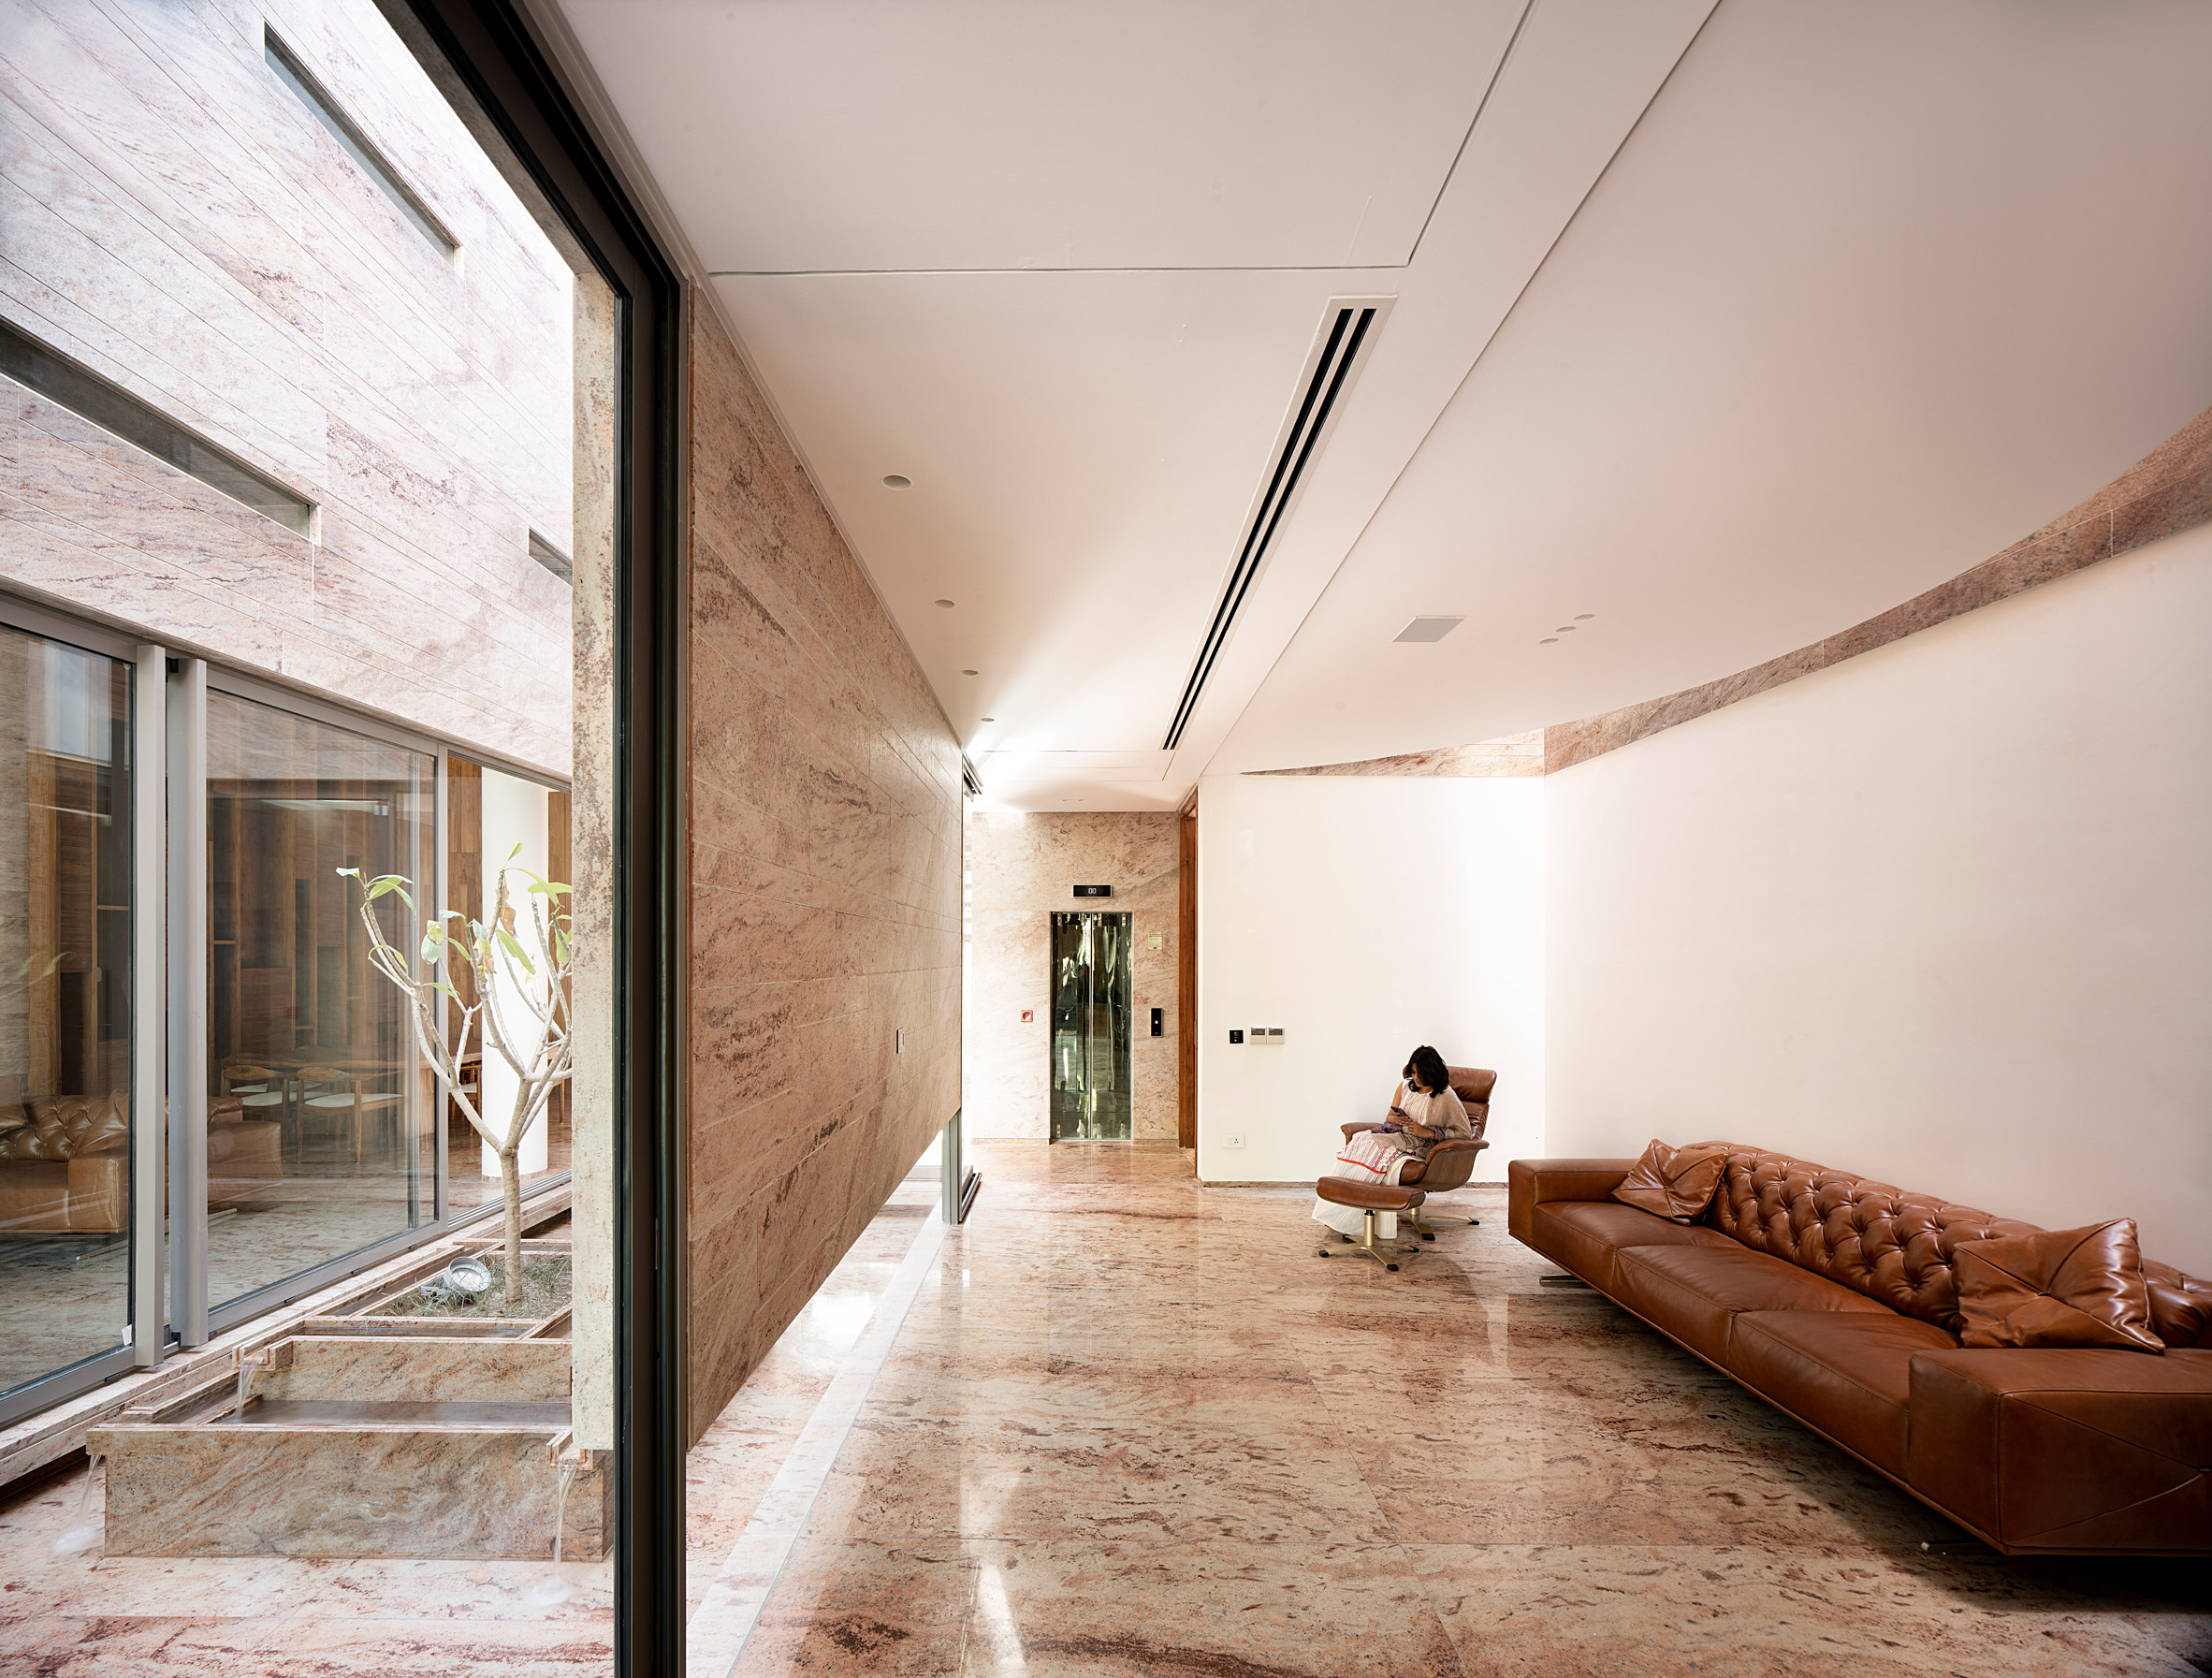 Residence 145 by Charged Voids in India